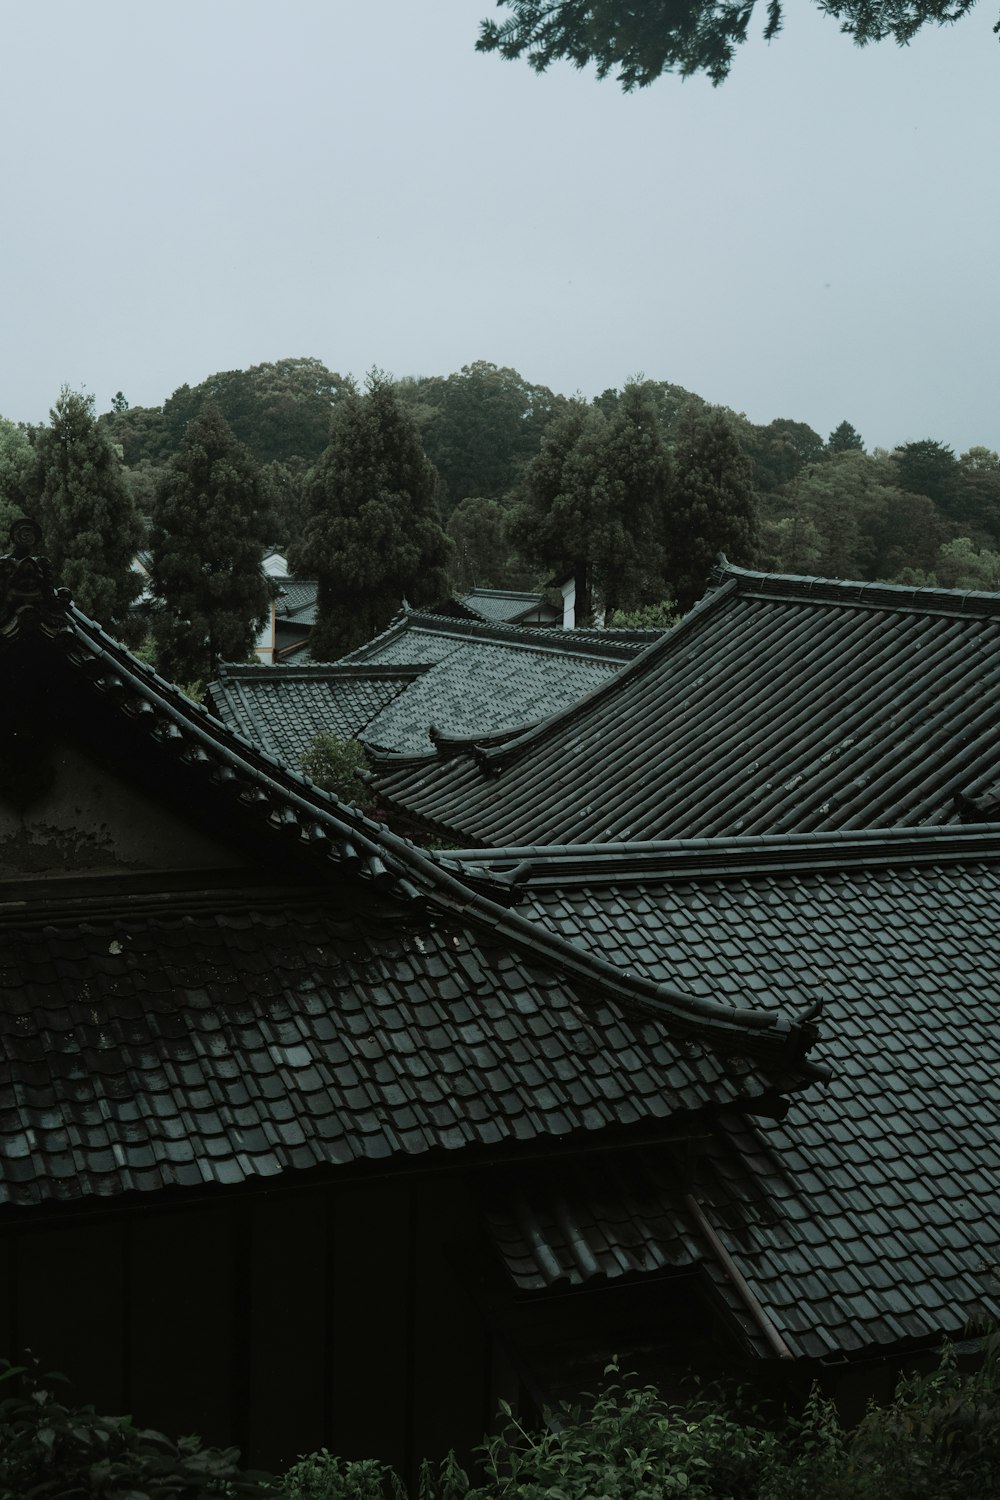 the roof of a building with trees in the background